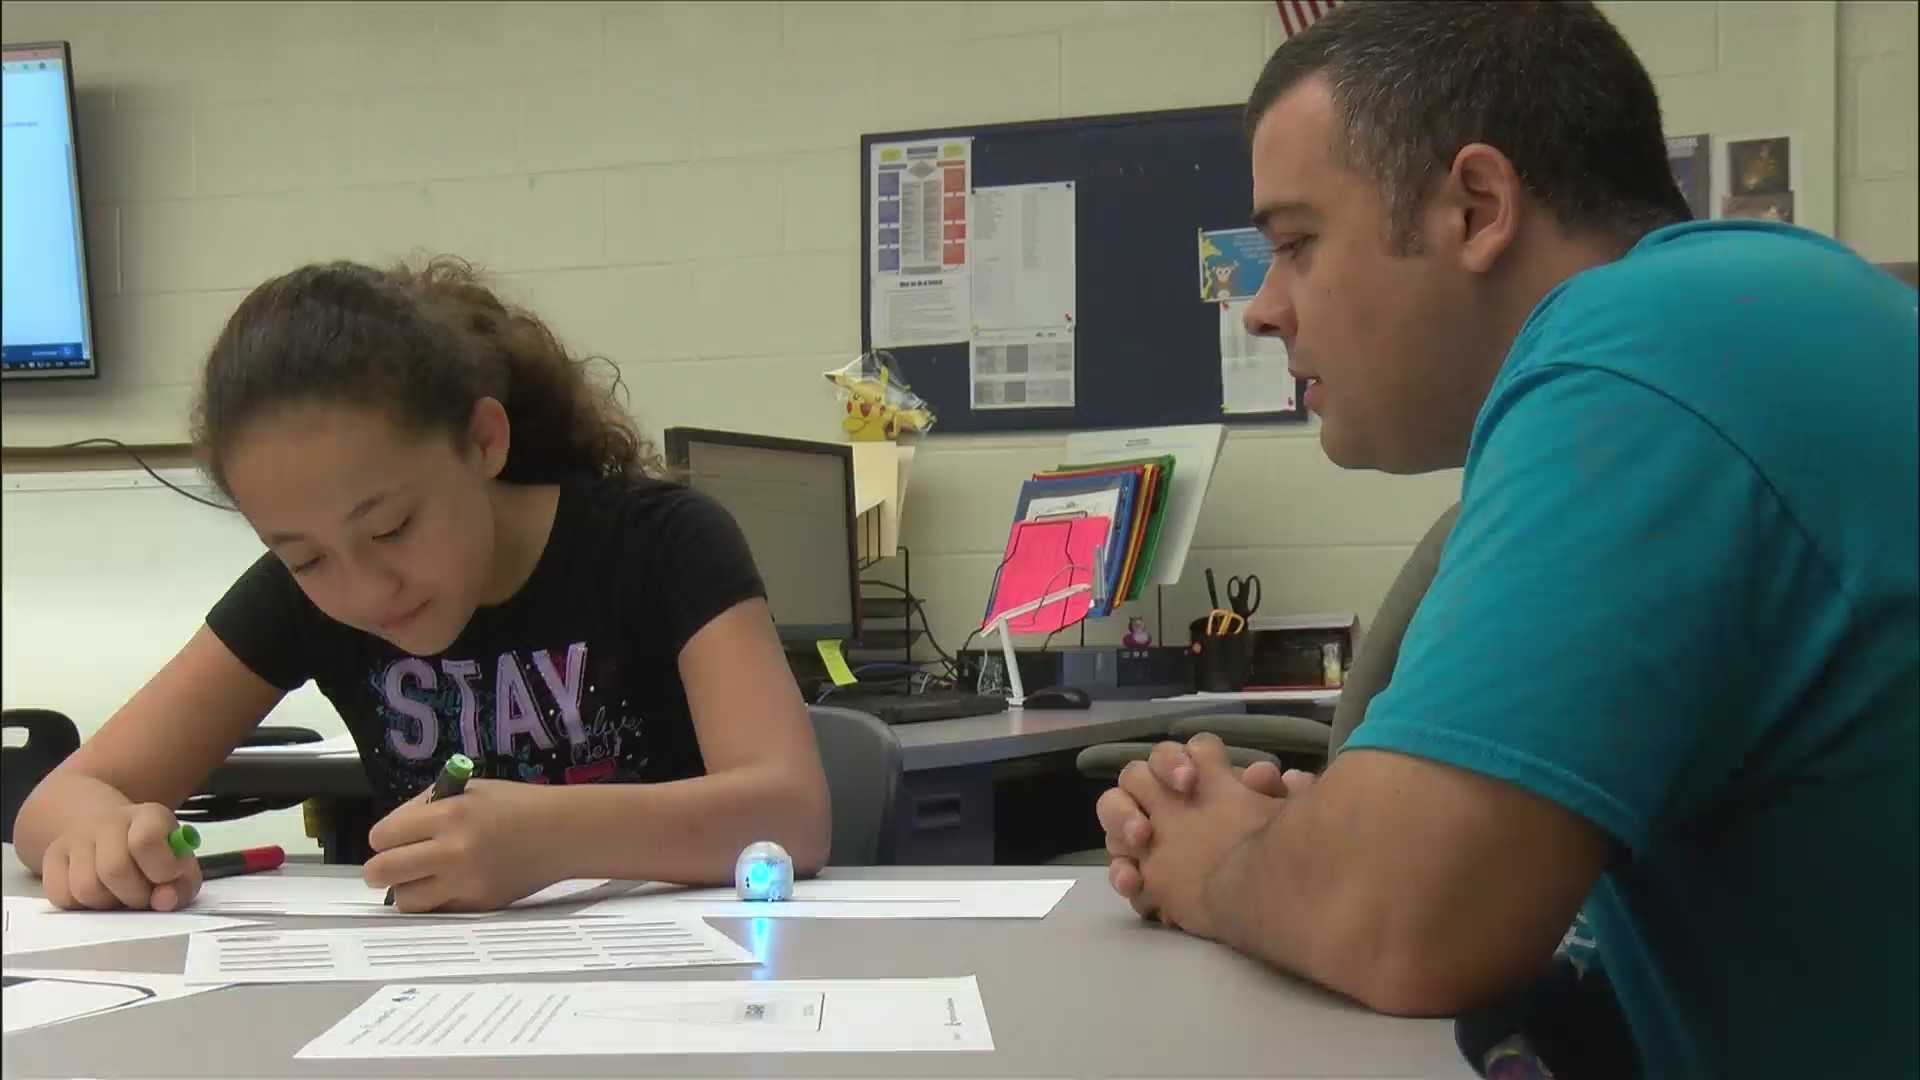 Javier Reyes, teacher at Monmouth Central Intermediate School, working with a student